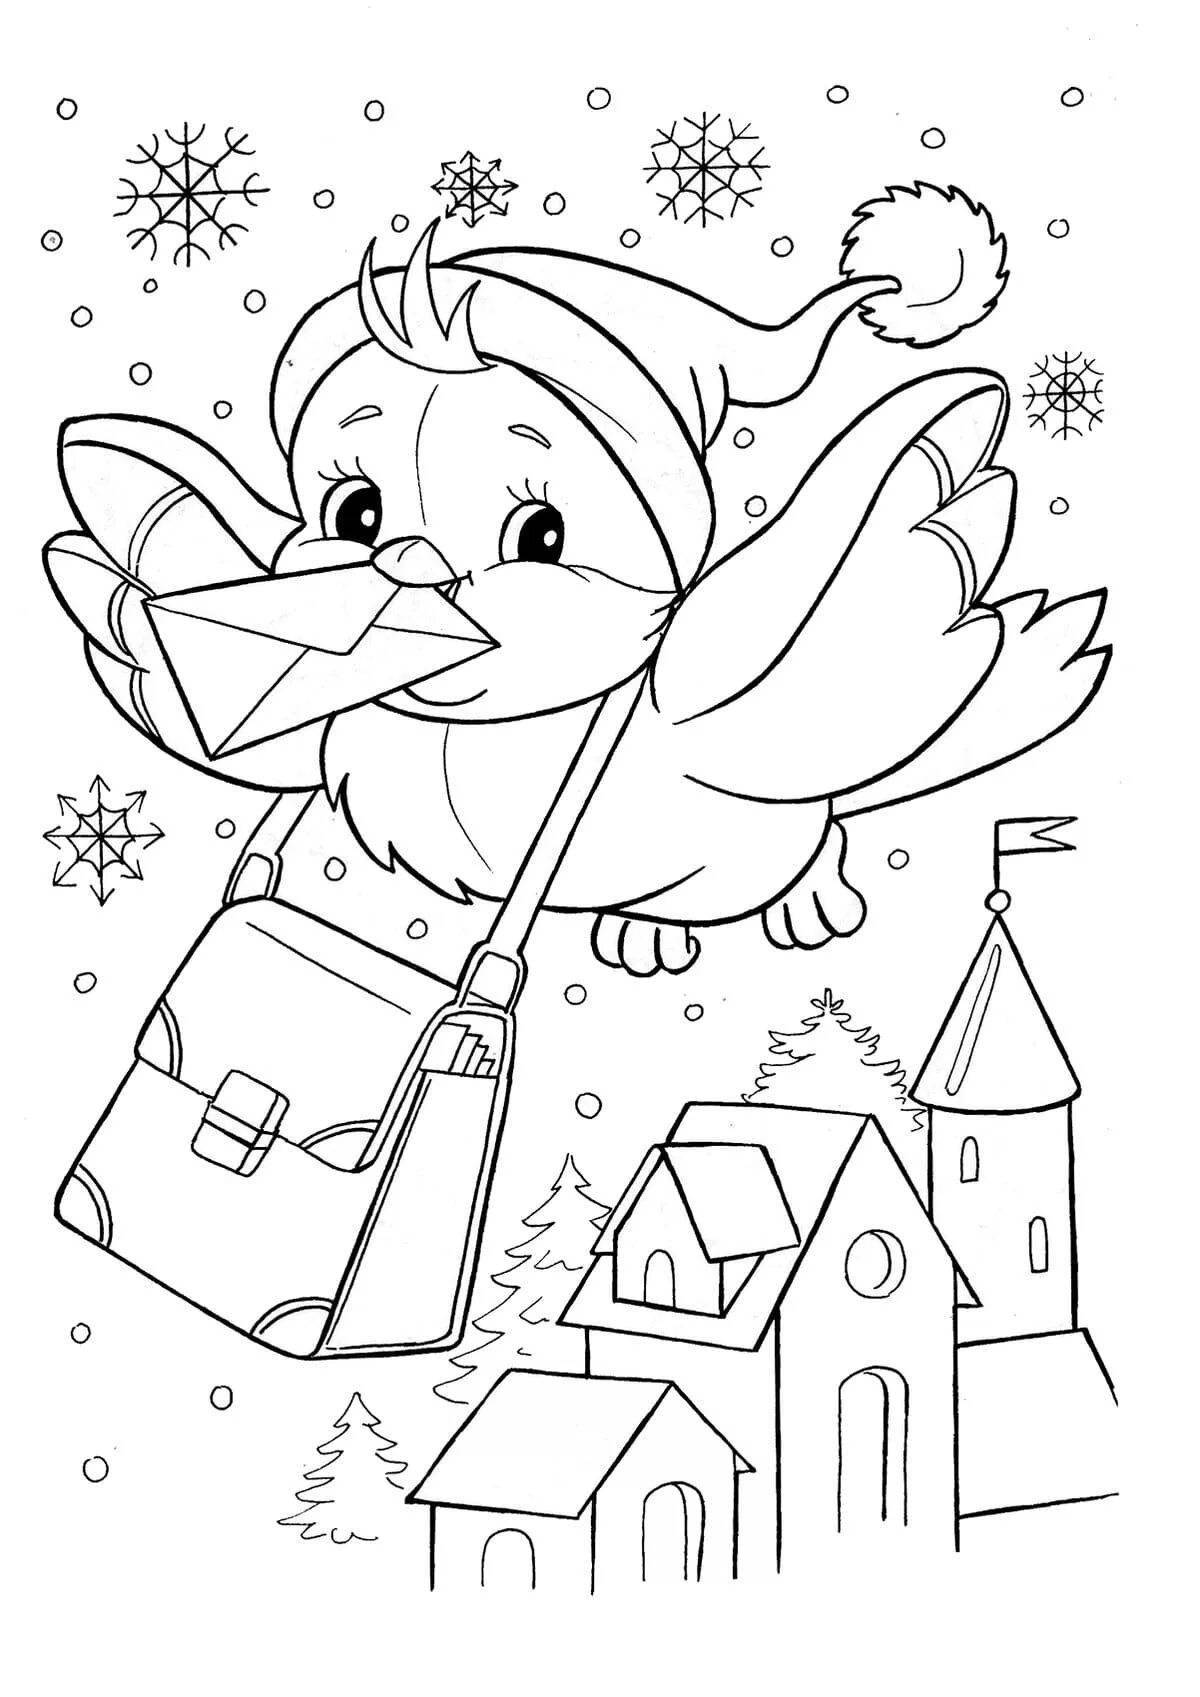 Animated winter coloring book for 4 year olds